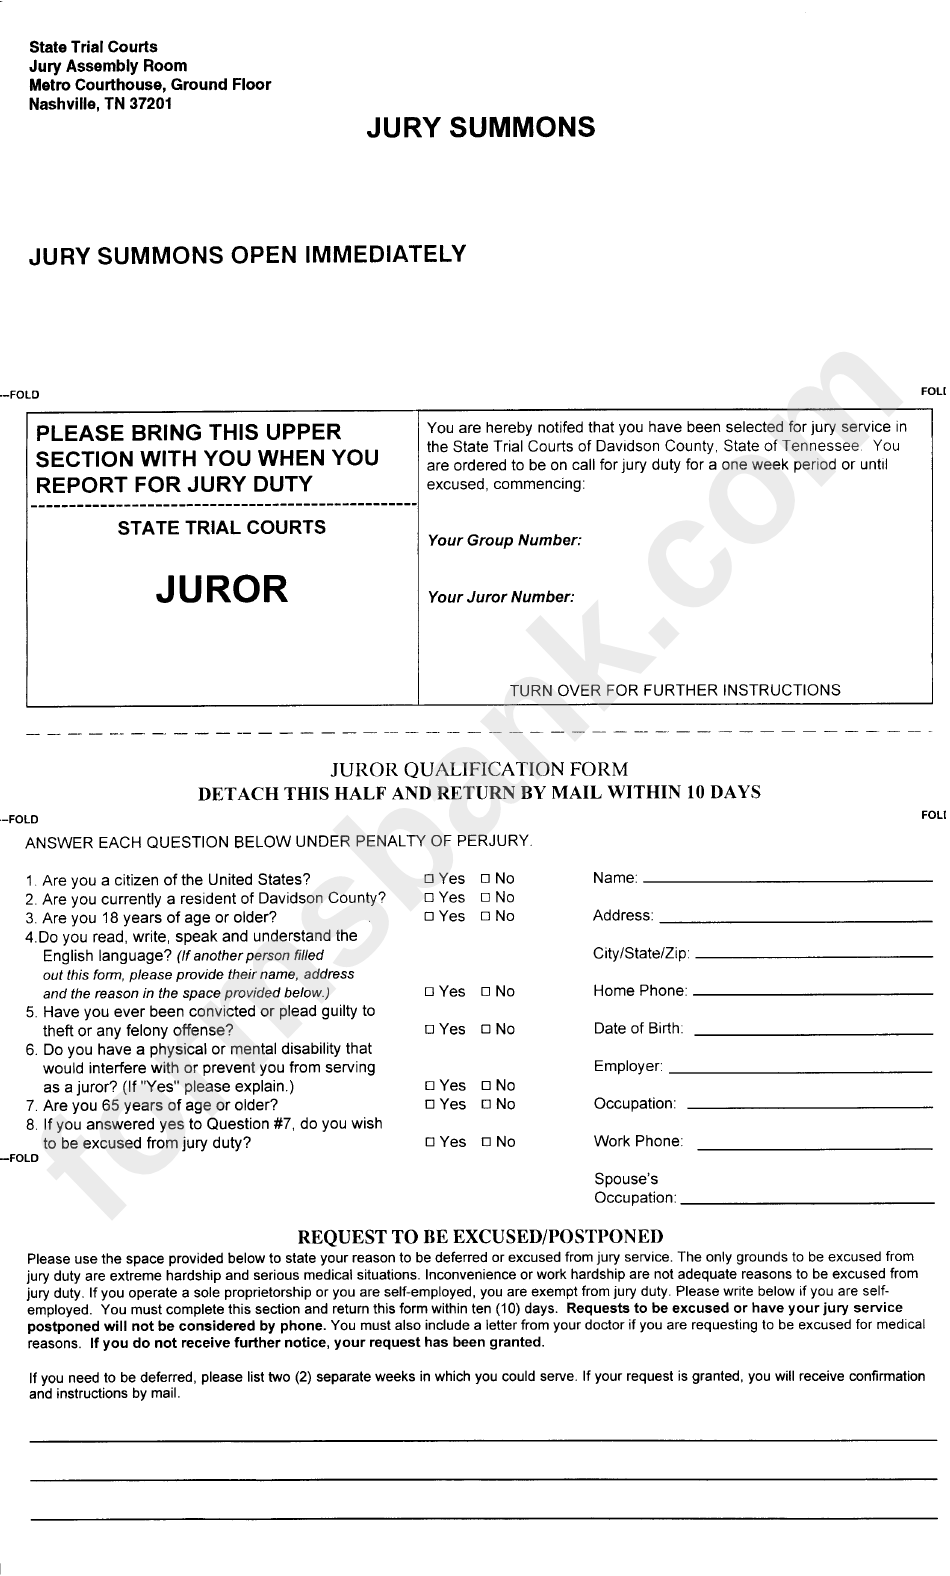 Juror Qualification Form - State Trial Courts Of Davidson County, Tennessee